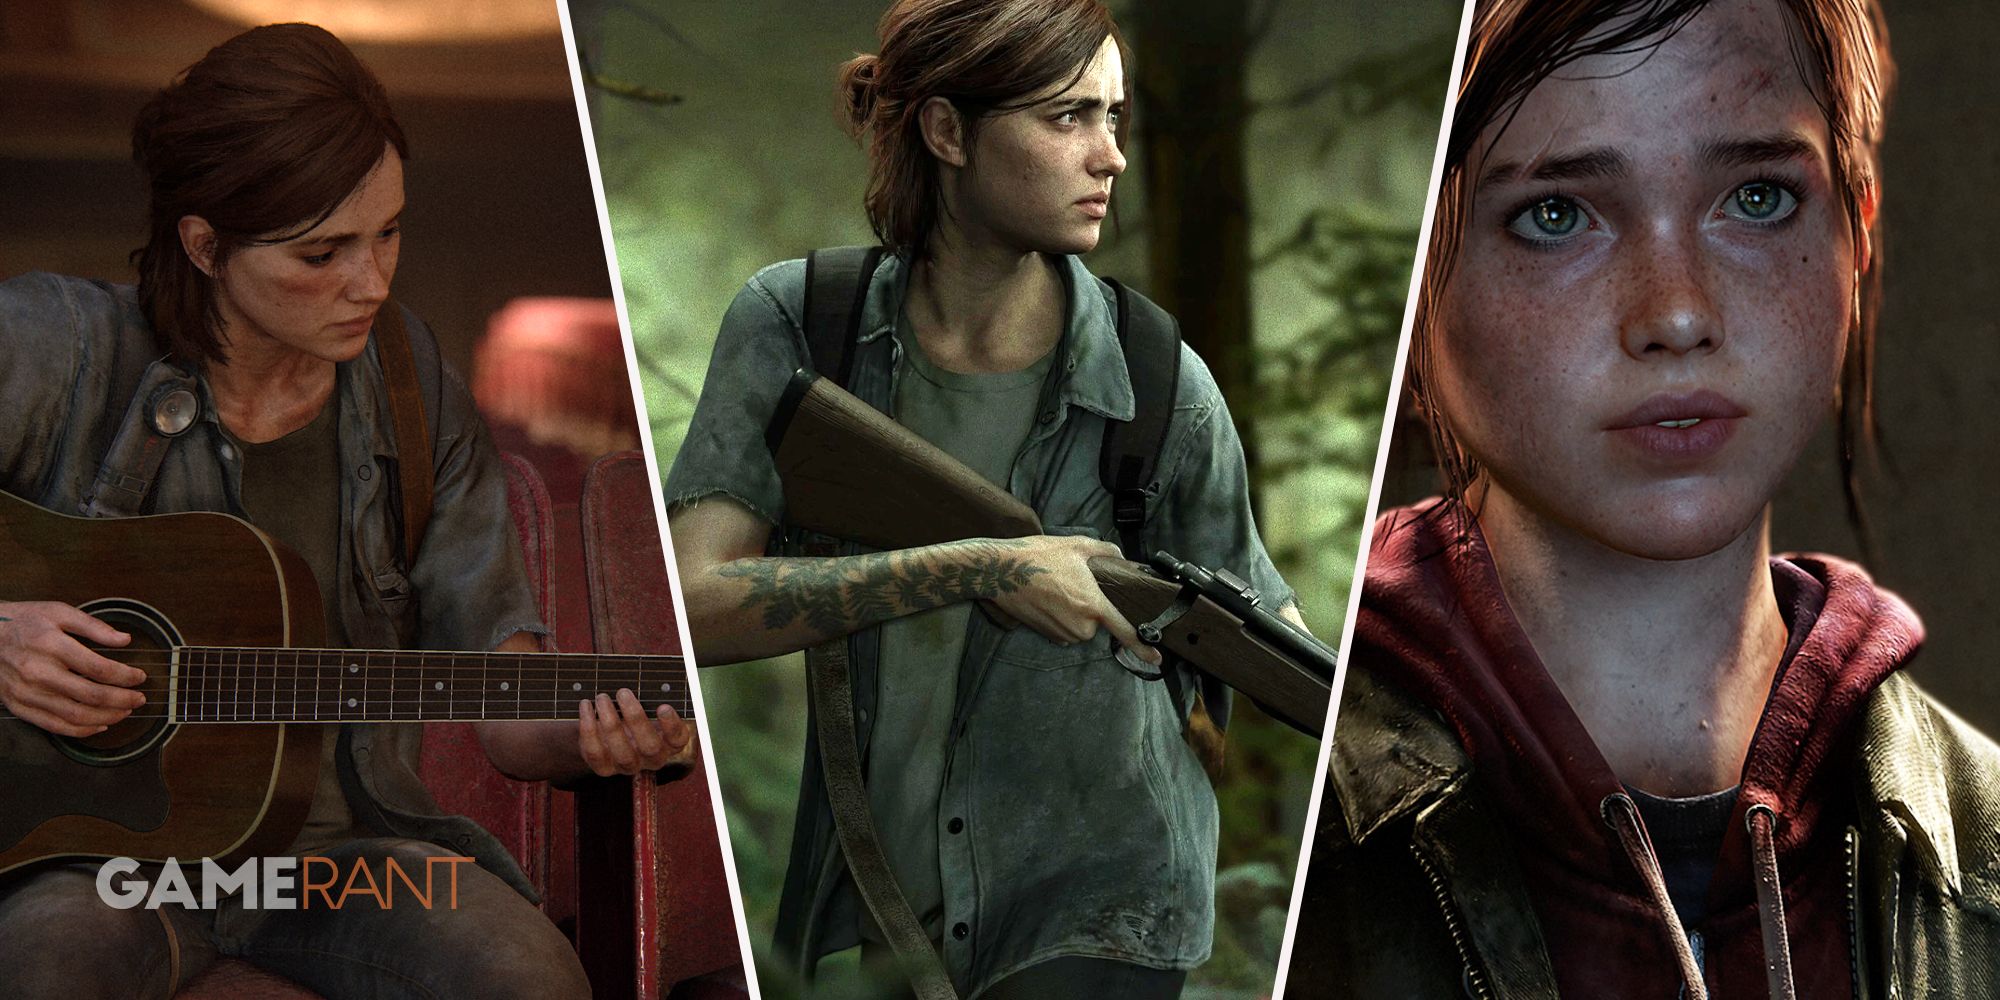 The Last of Us Ellie with guitar on left, Ellie with a rifle in the forest in middle, Ellie younger on right